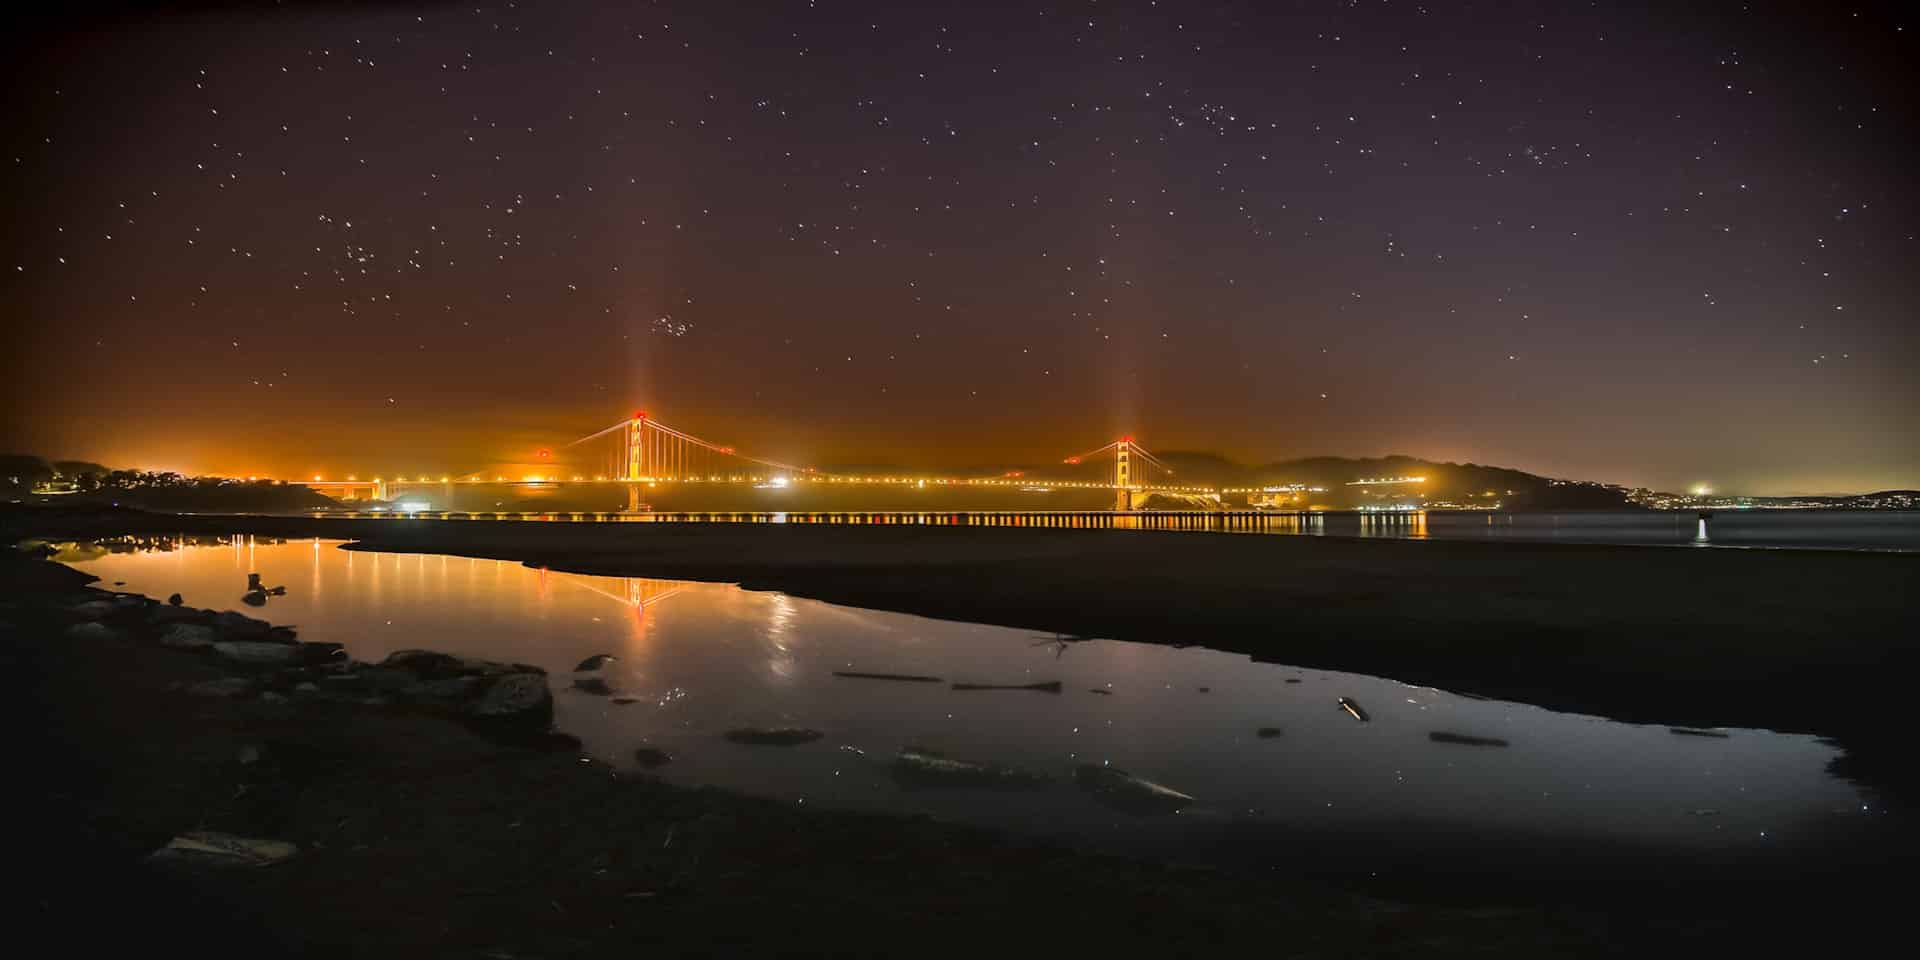 Night view of the Golden Gate Bridge from Crissy Field East Beach in San Francisco